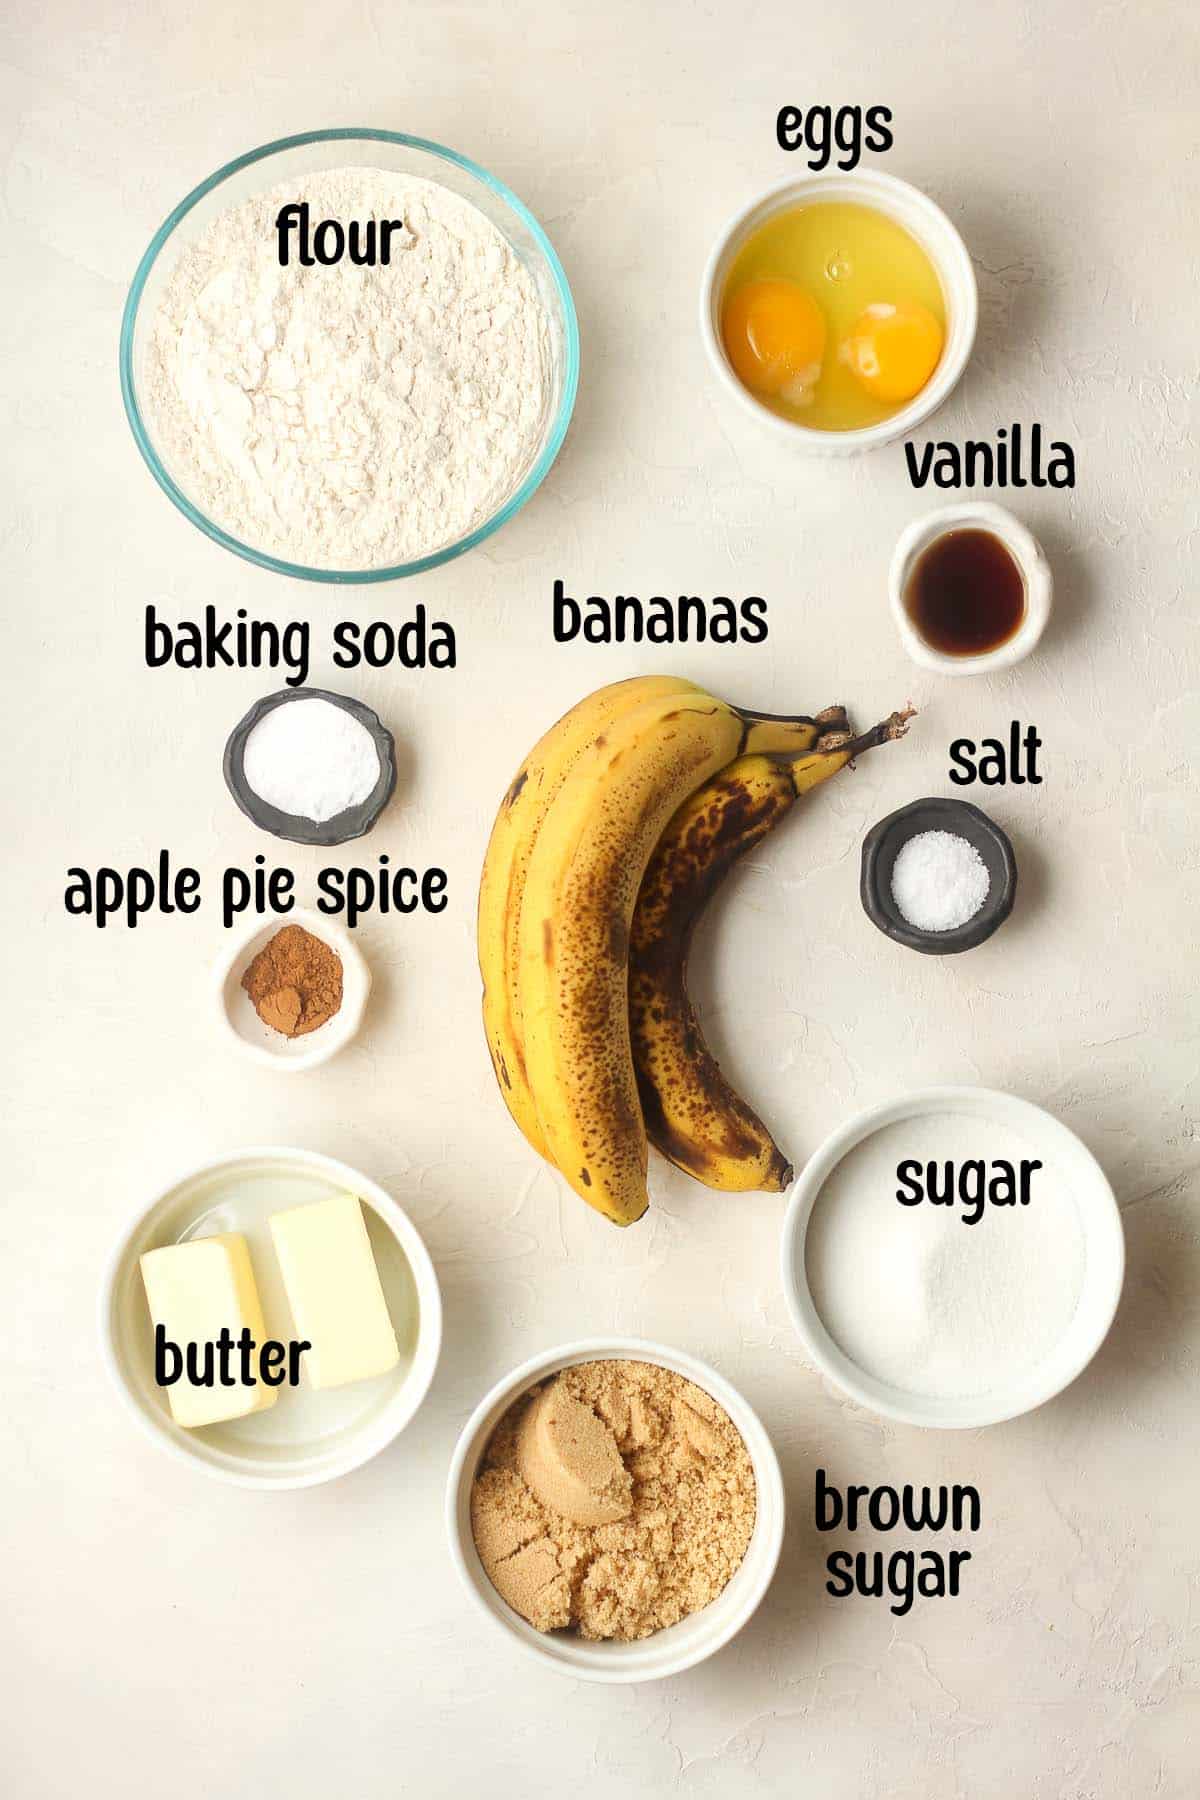 The banana cake ingredients with labels.